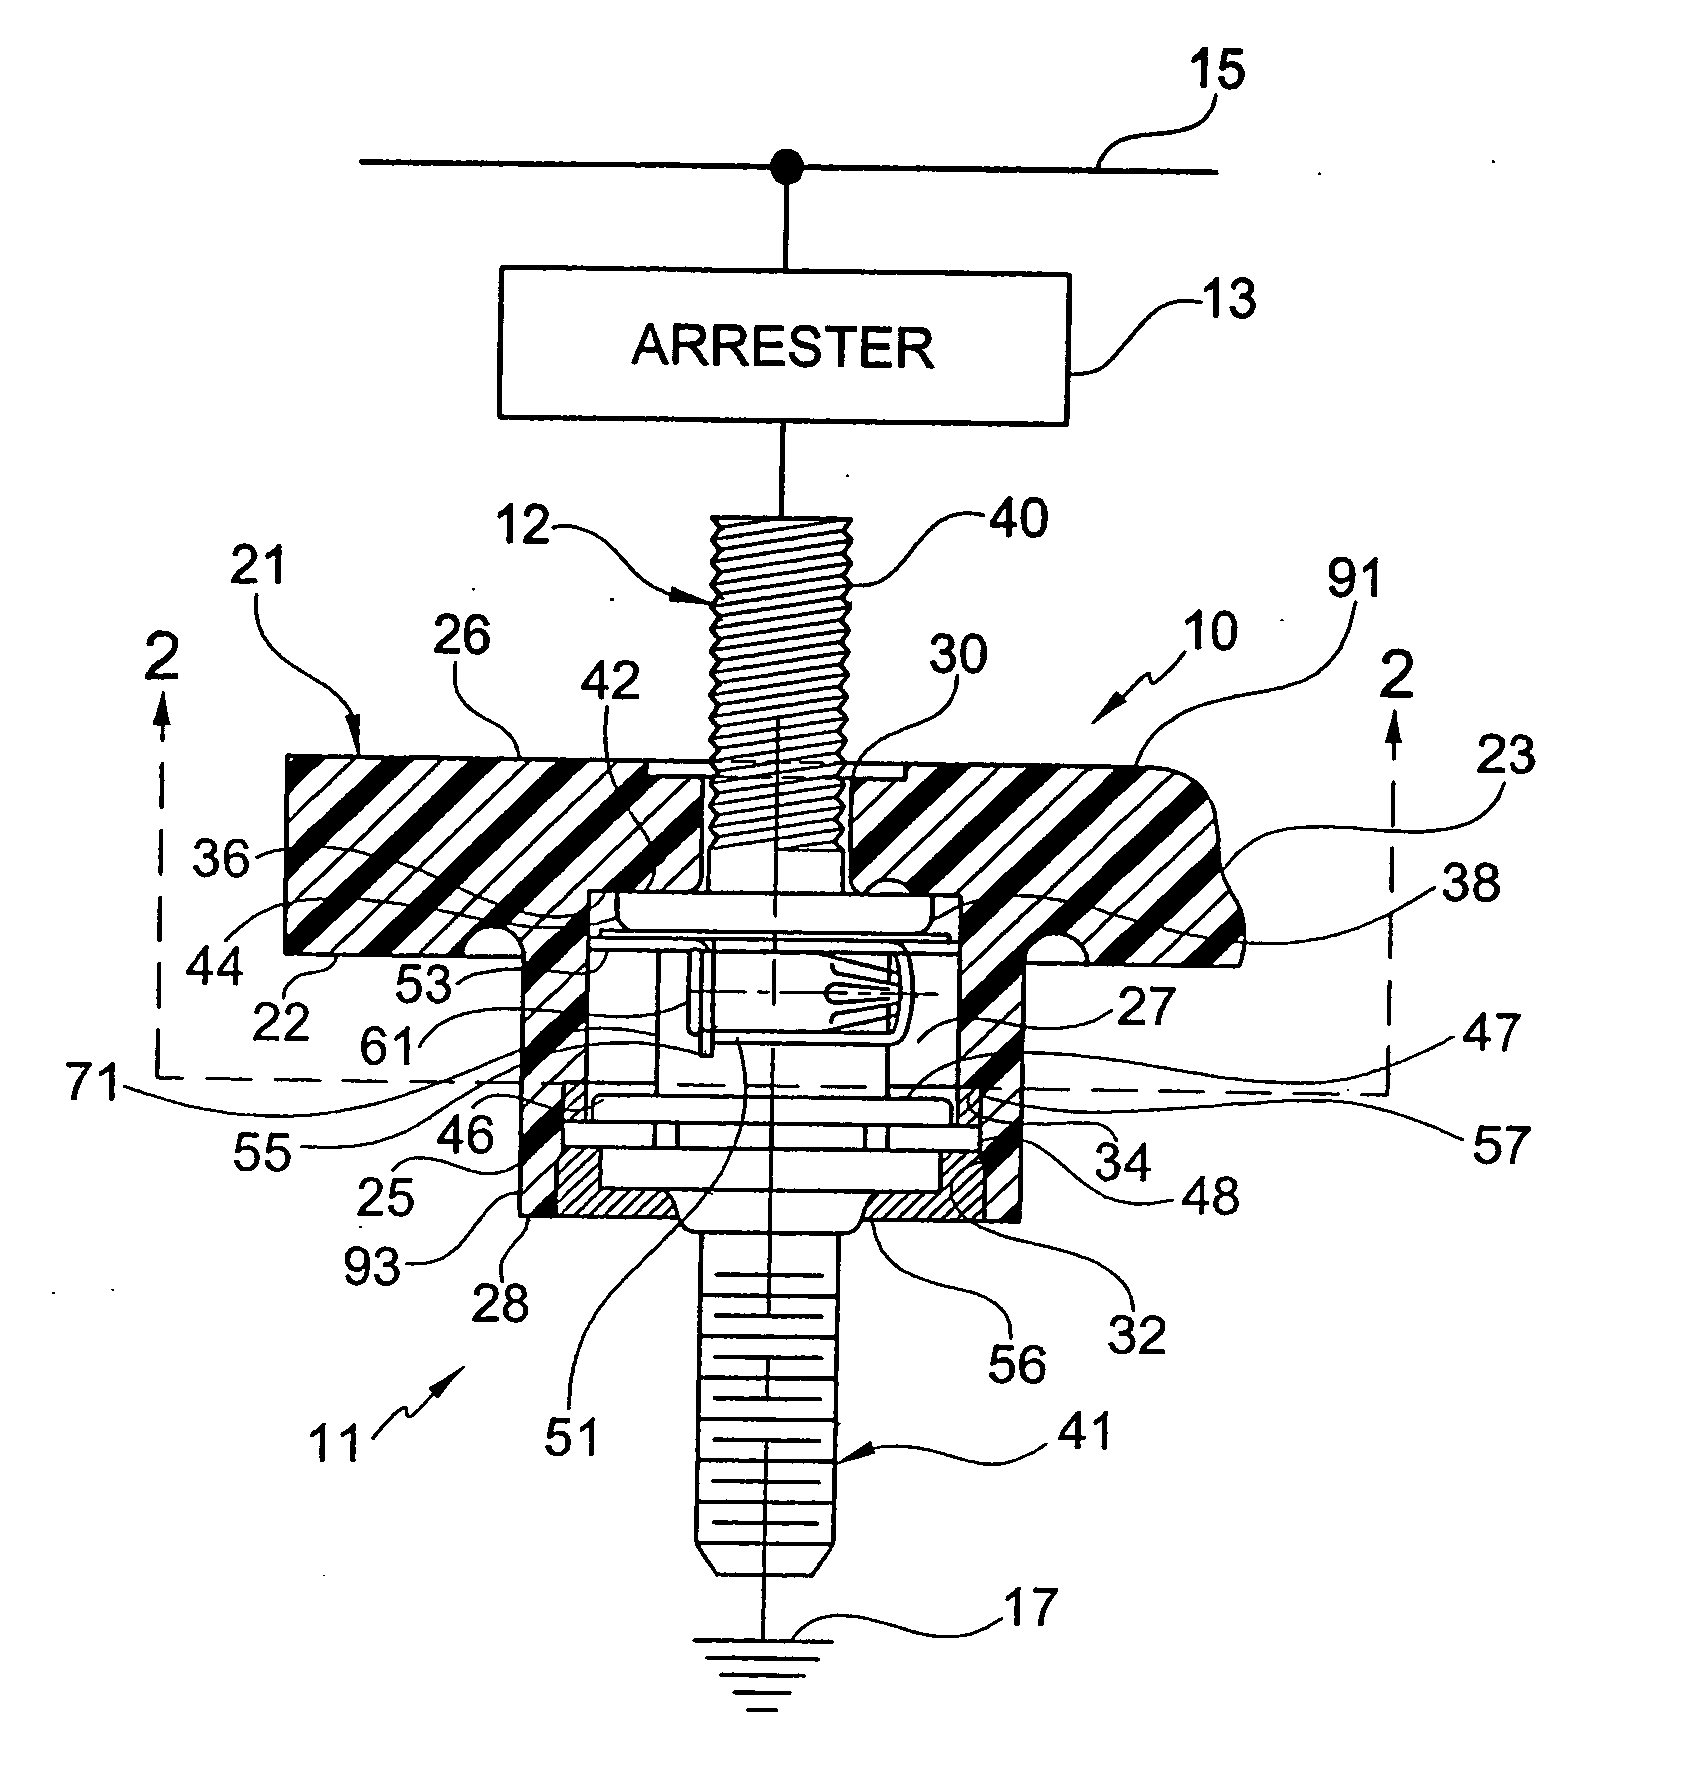 Arrester disconnector assembly having a capacitor